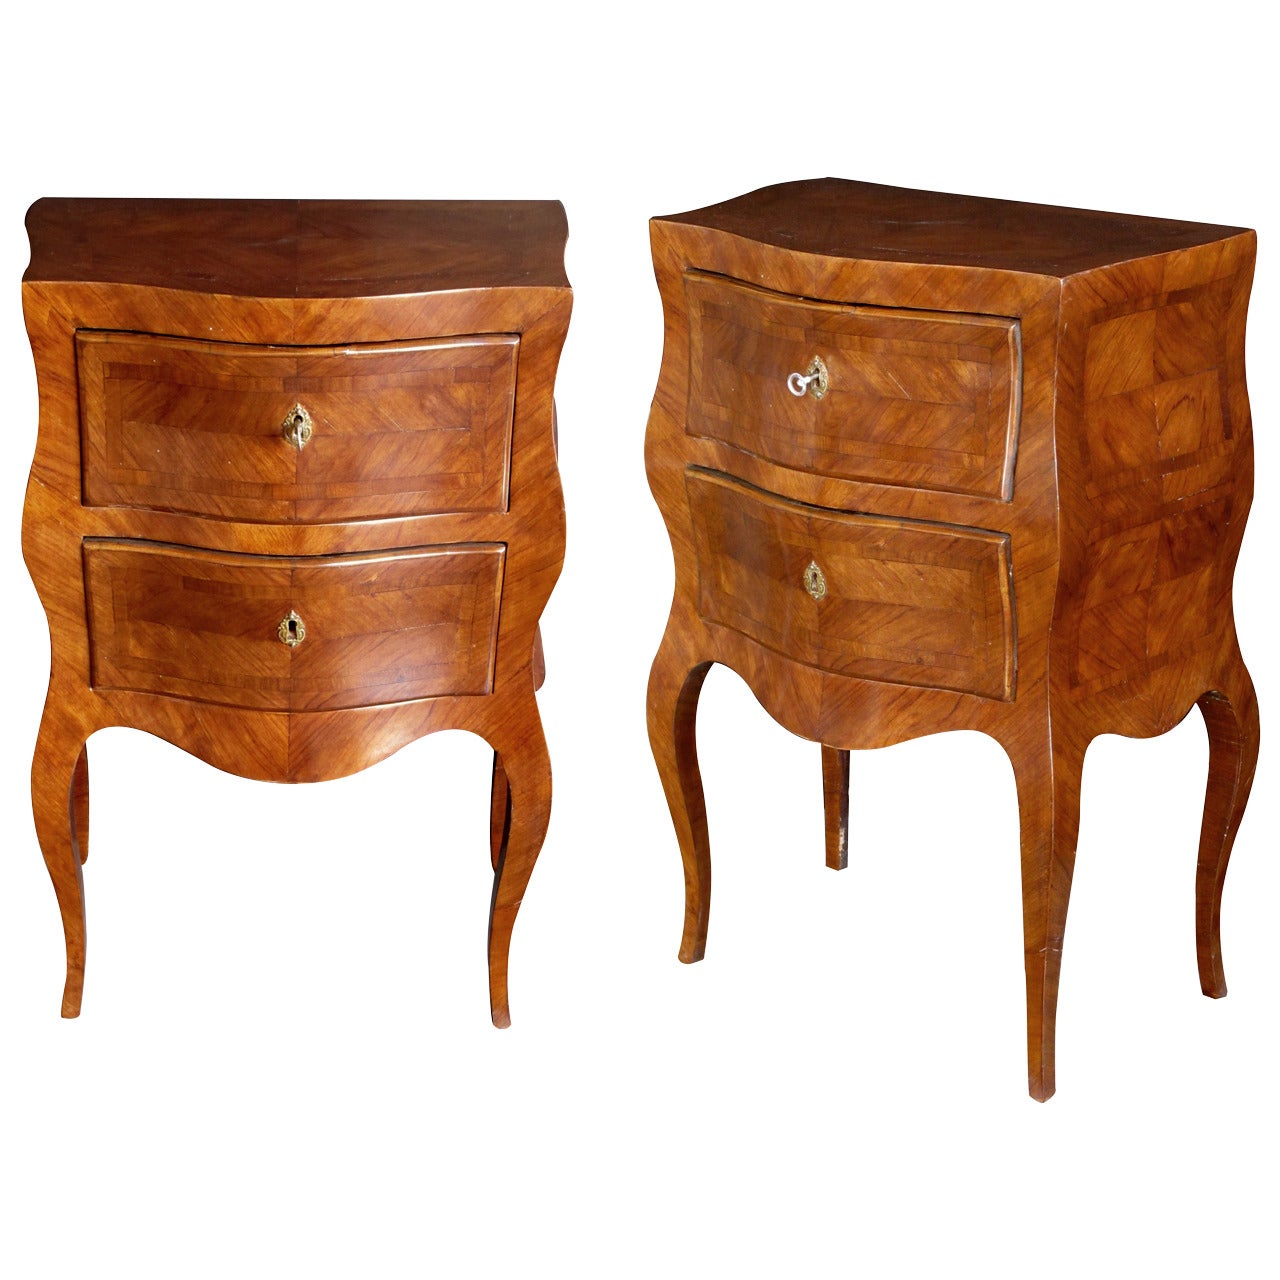 A Shapely Pair of Italian Rococo Style Walnut Bedside Commodes